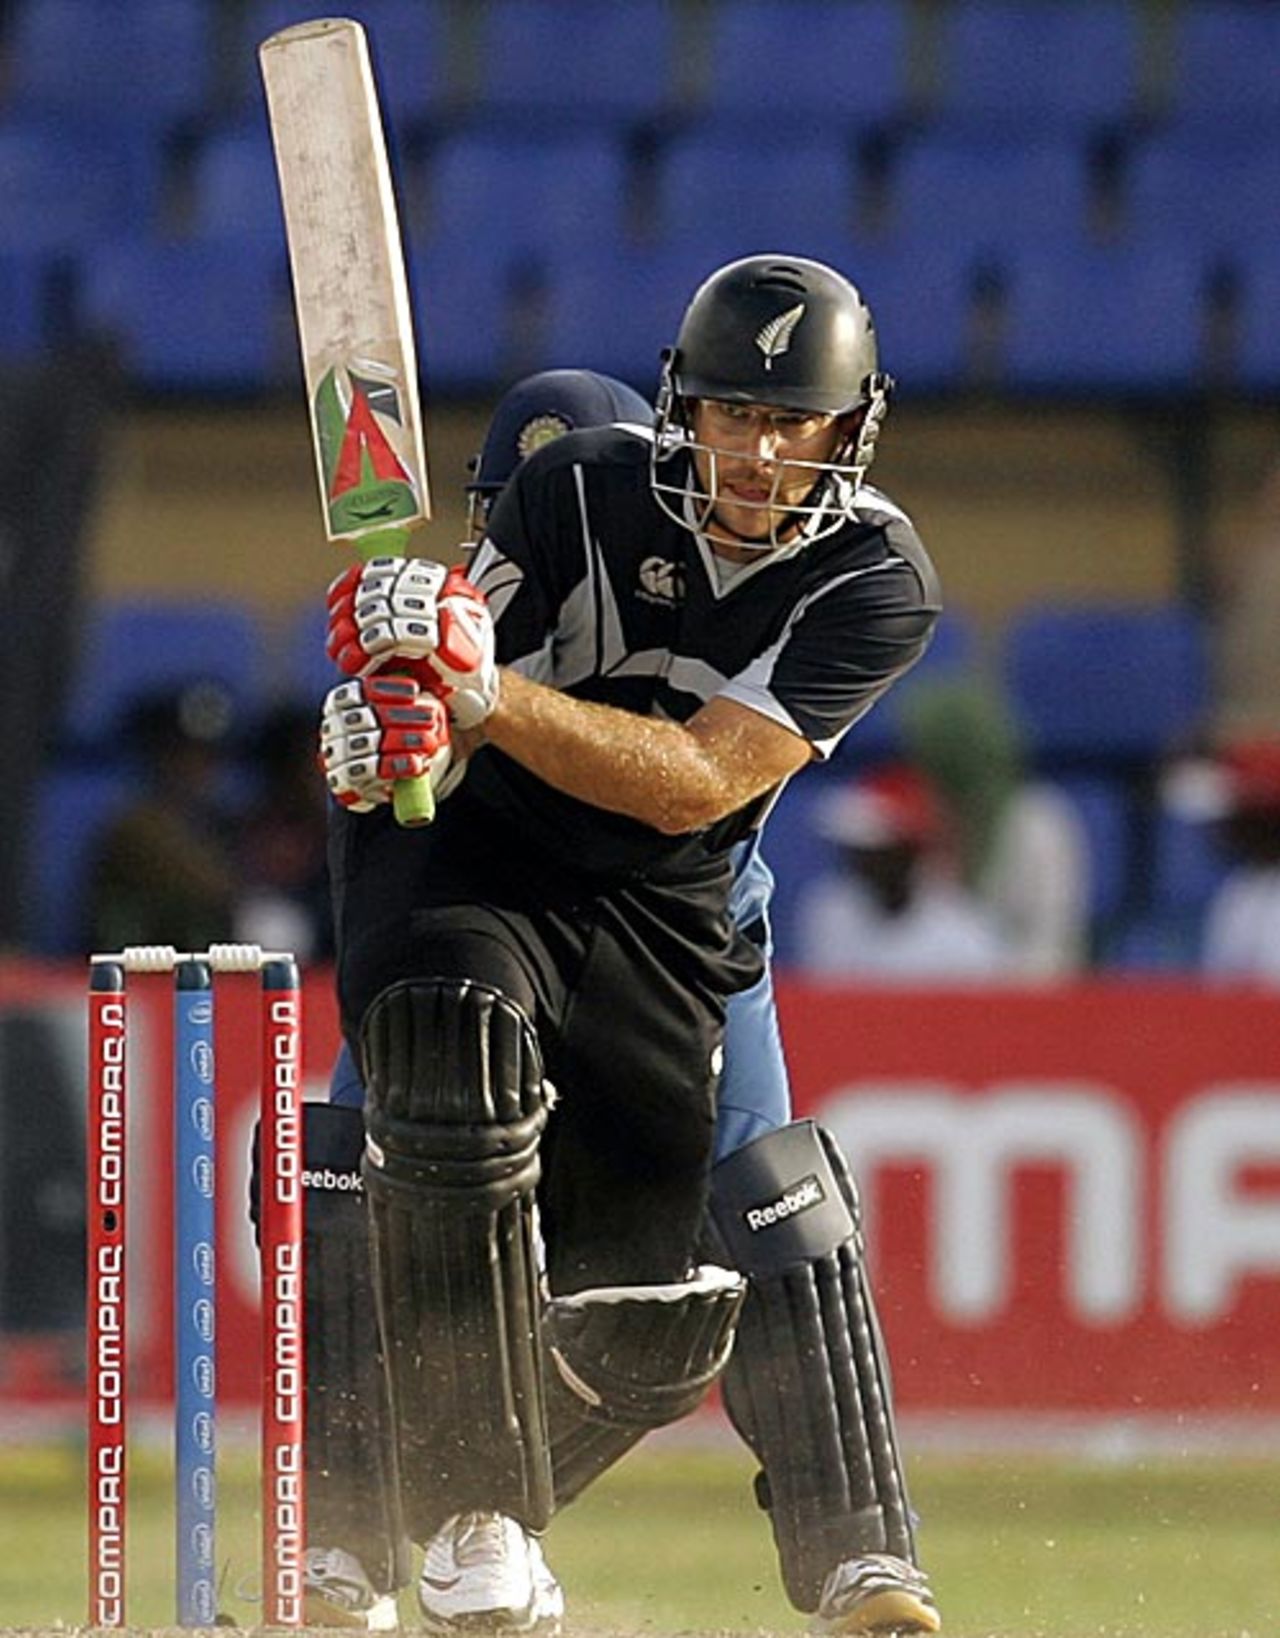 Daniel Vettori drives through the leg side, India v New Zealand, 2nd match, Compaq Cup, Colombo, September 11, 2009